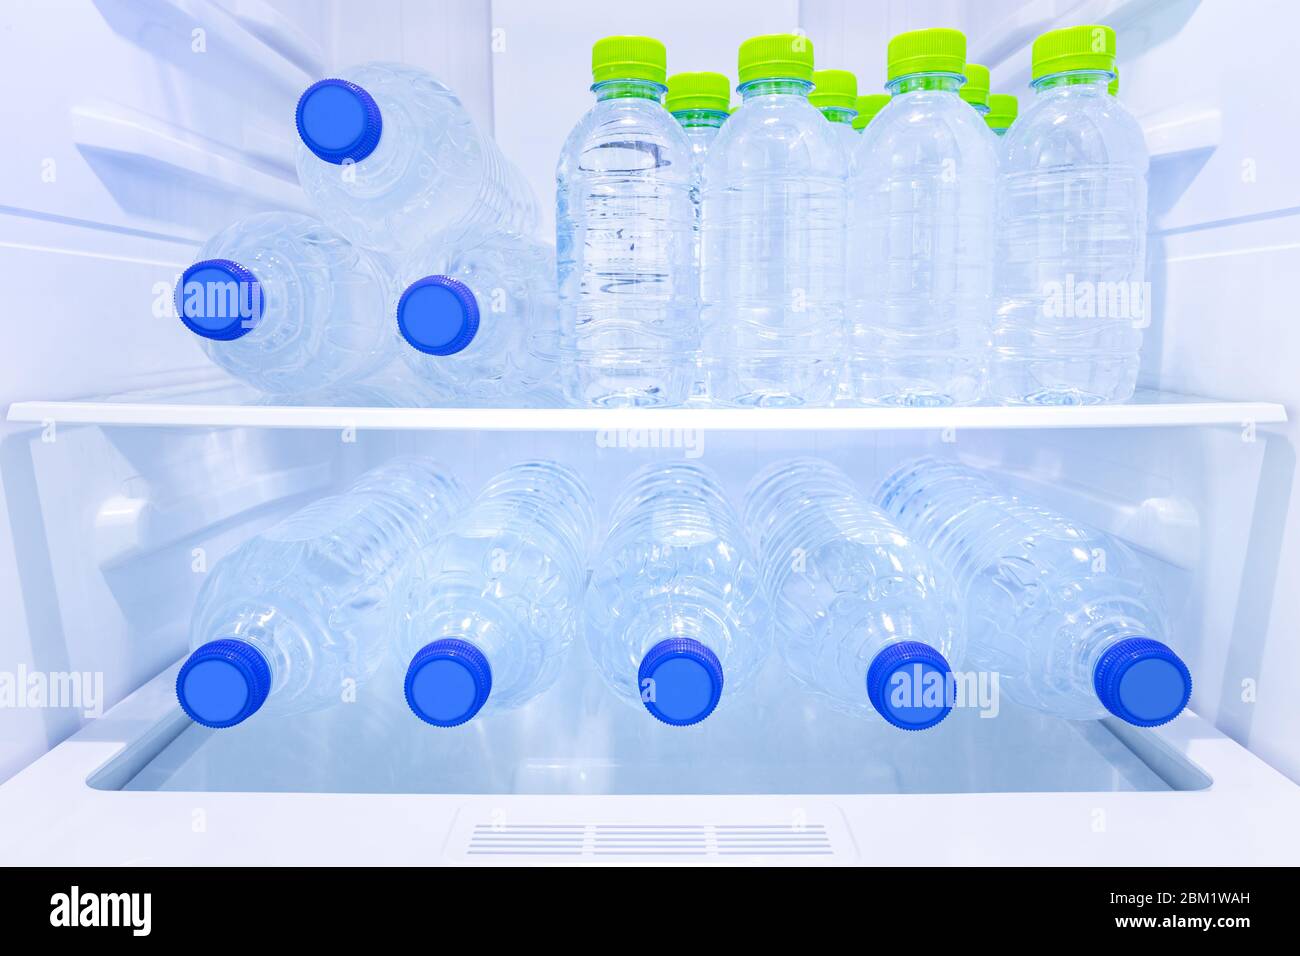 Fresh And Chilled Bottles Of Drinking Water In The Fridge Stock Photo,  Picture and Royalty Free Image. Image 84643878.